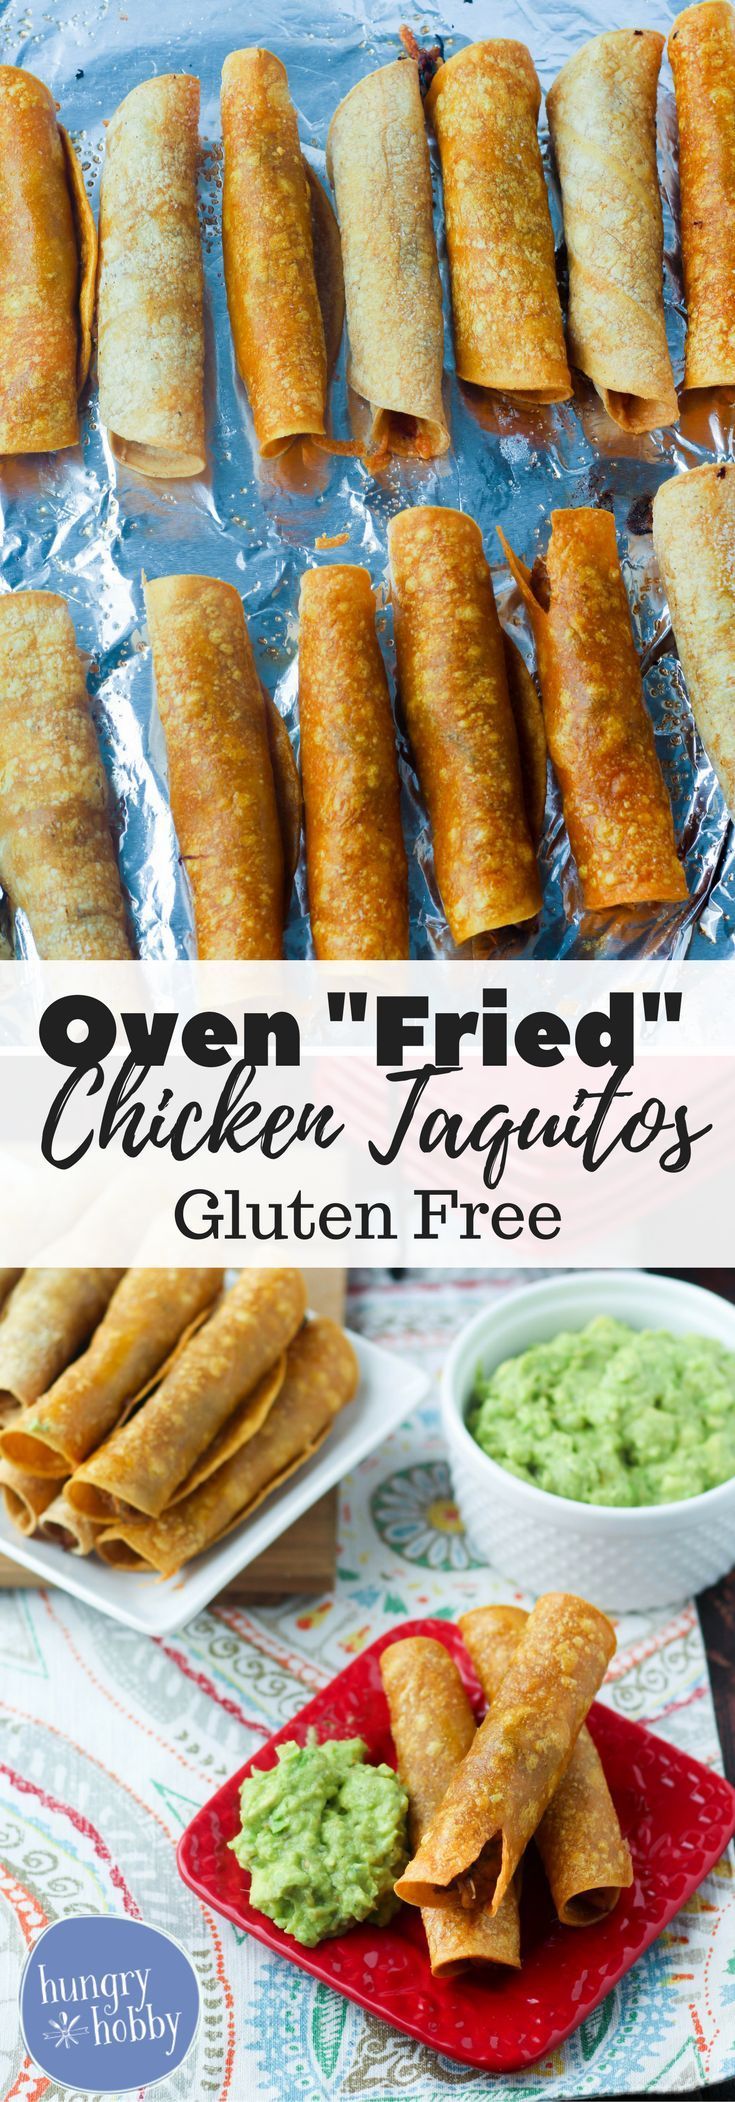 Oven Fried Chicken Taquitos -   15 gluten free mexican recipes
 ideas